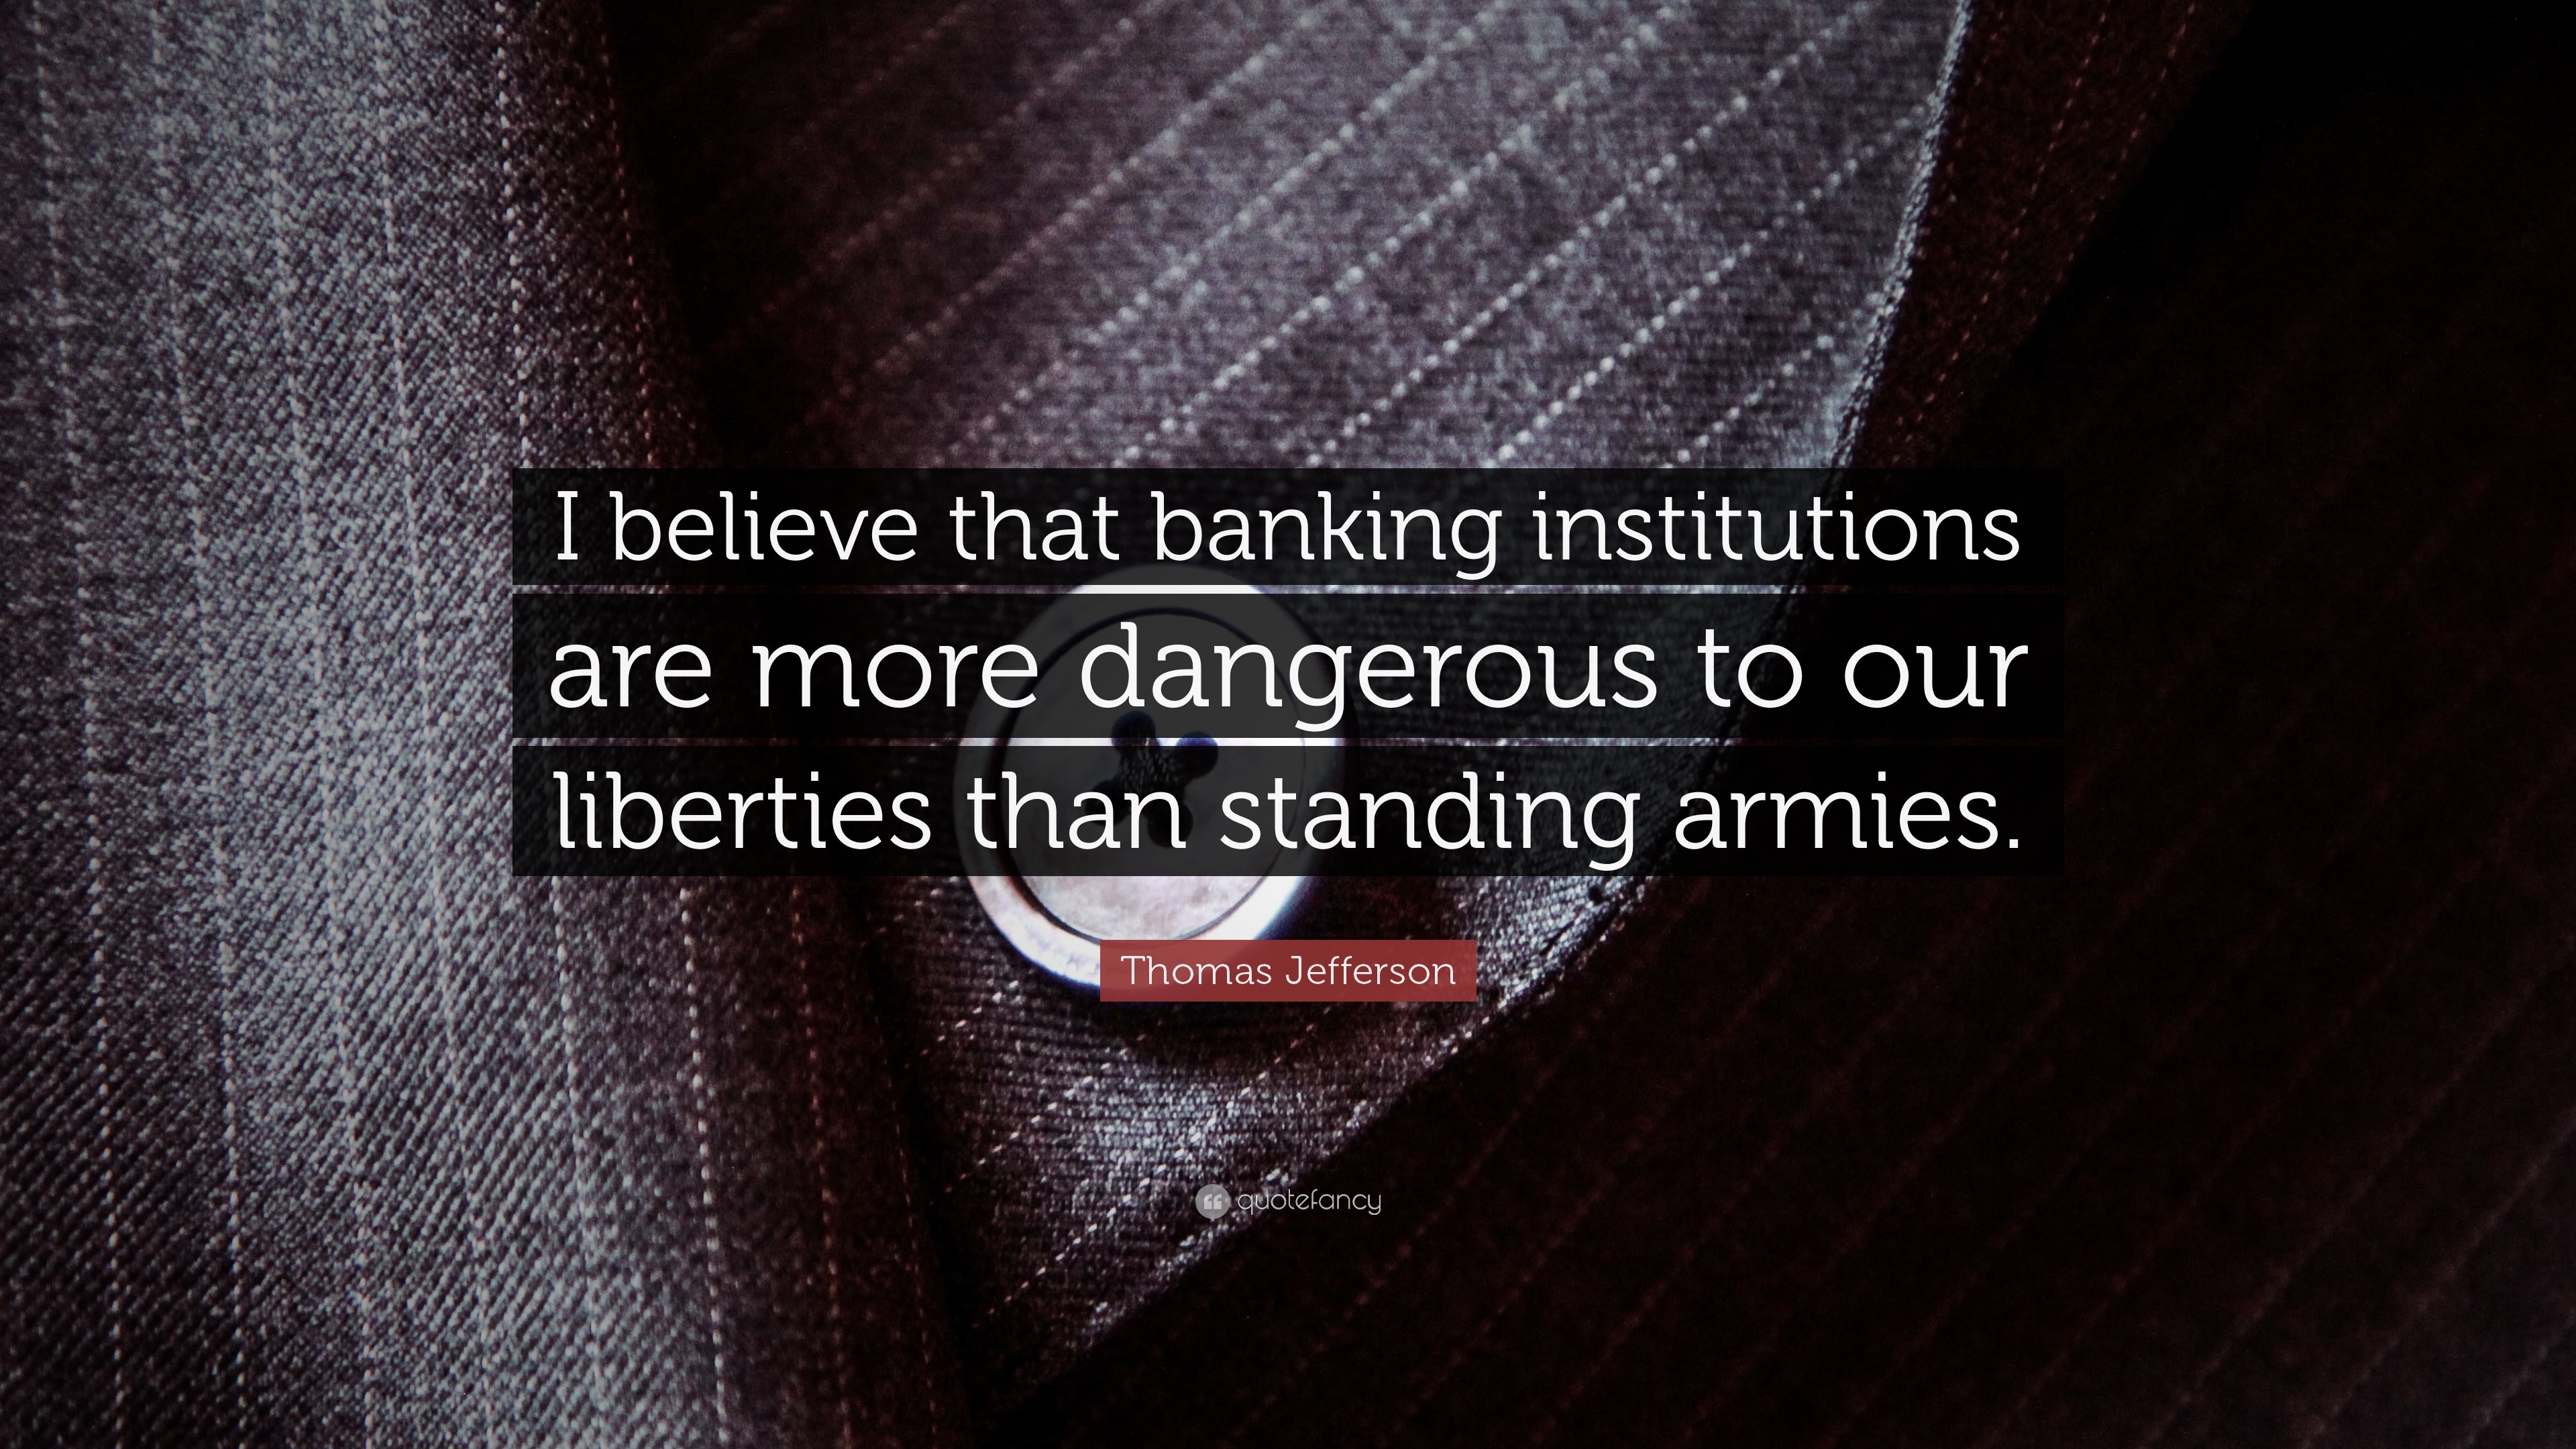 3840x2160 Thomas Jefferson Quote: “I believe that banking institutions are more  dangerous to our liberties